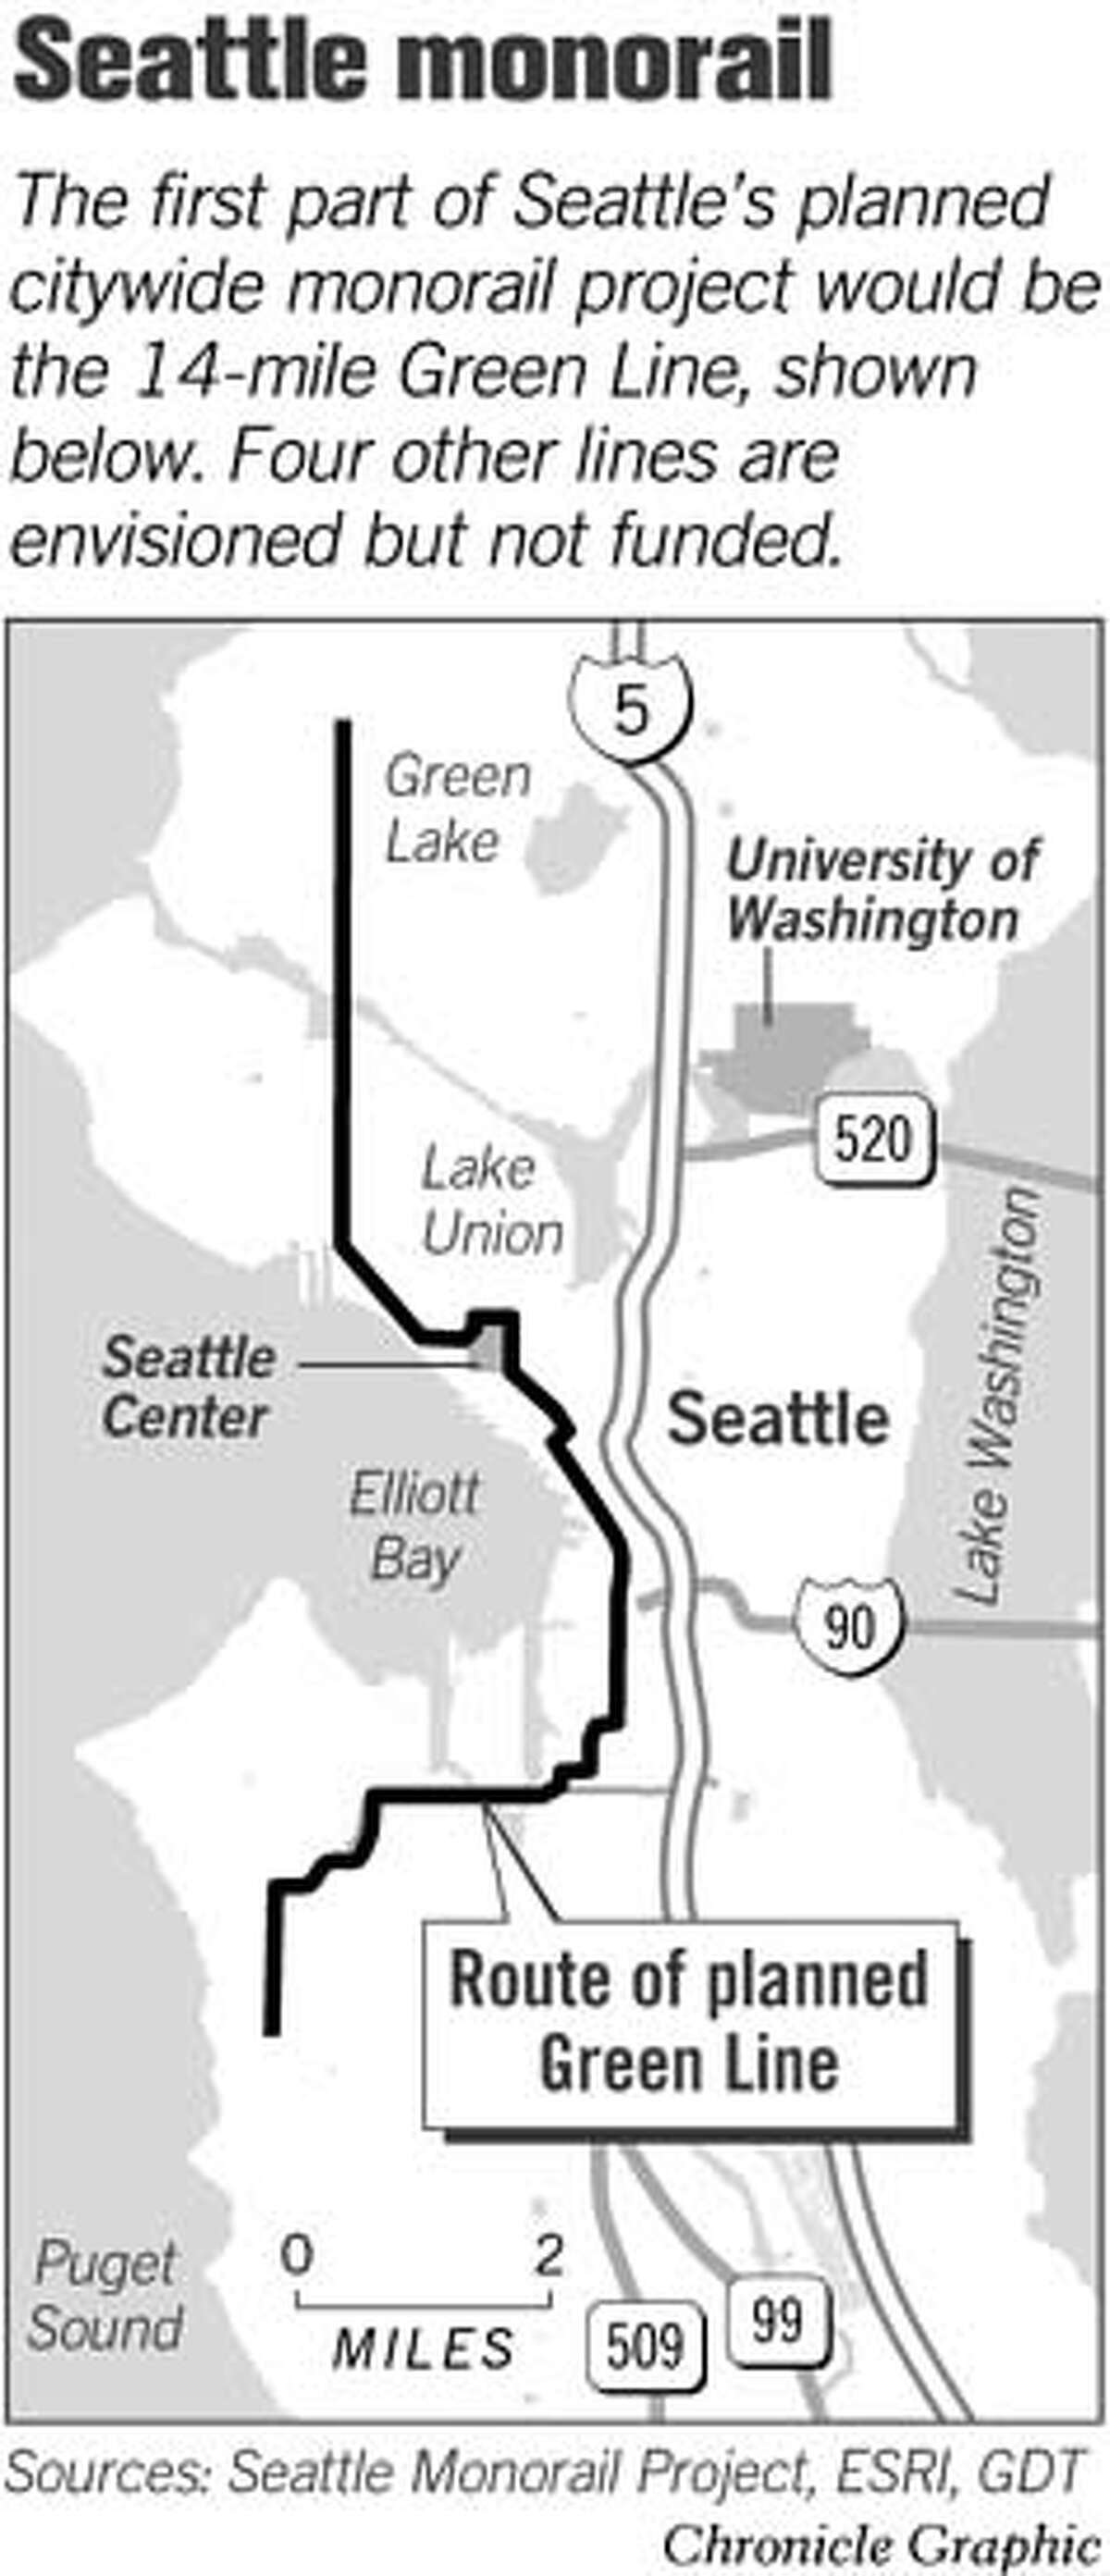 Seattle Monorail. Chronicle Graphic